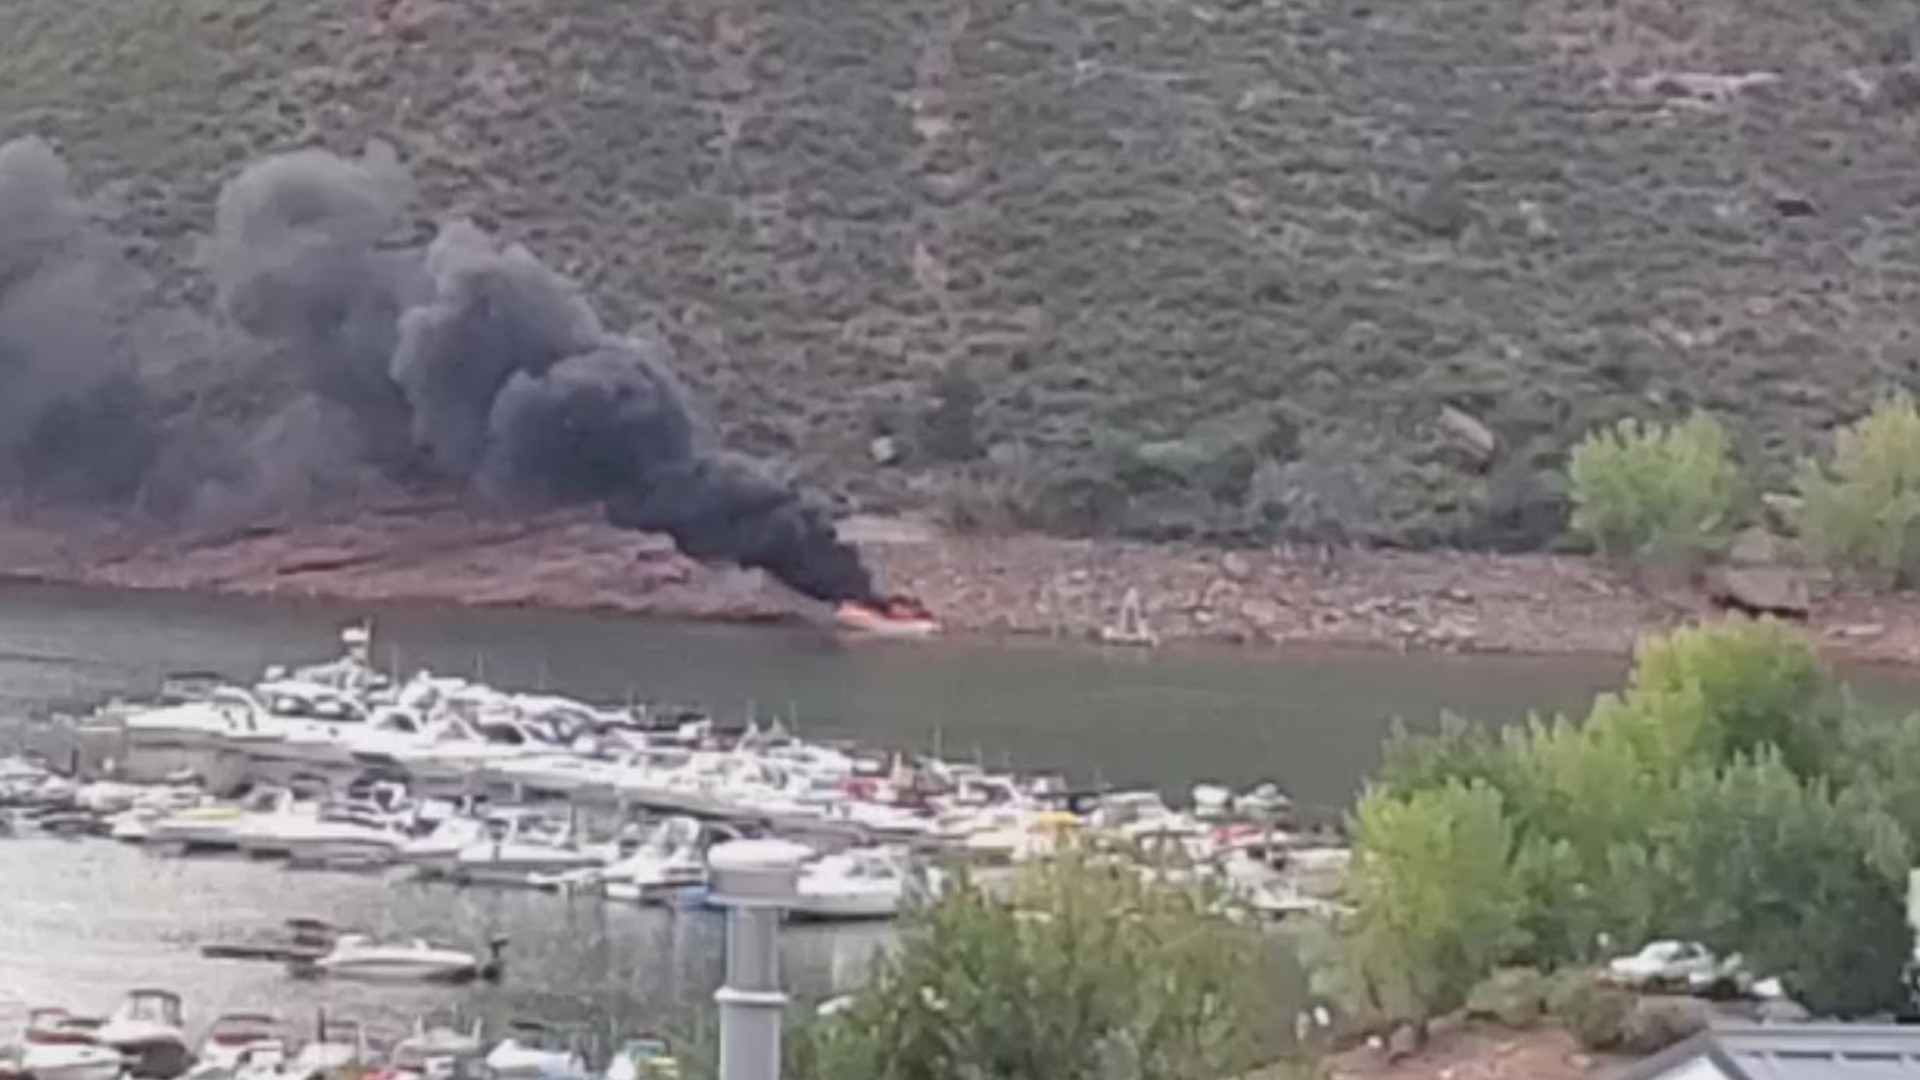 A boat exploded near the Horsetooth Reservoir marina, injuring five people, Poudre Fire District said.